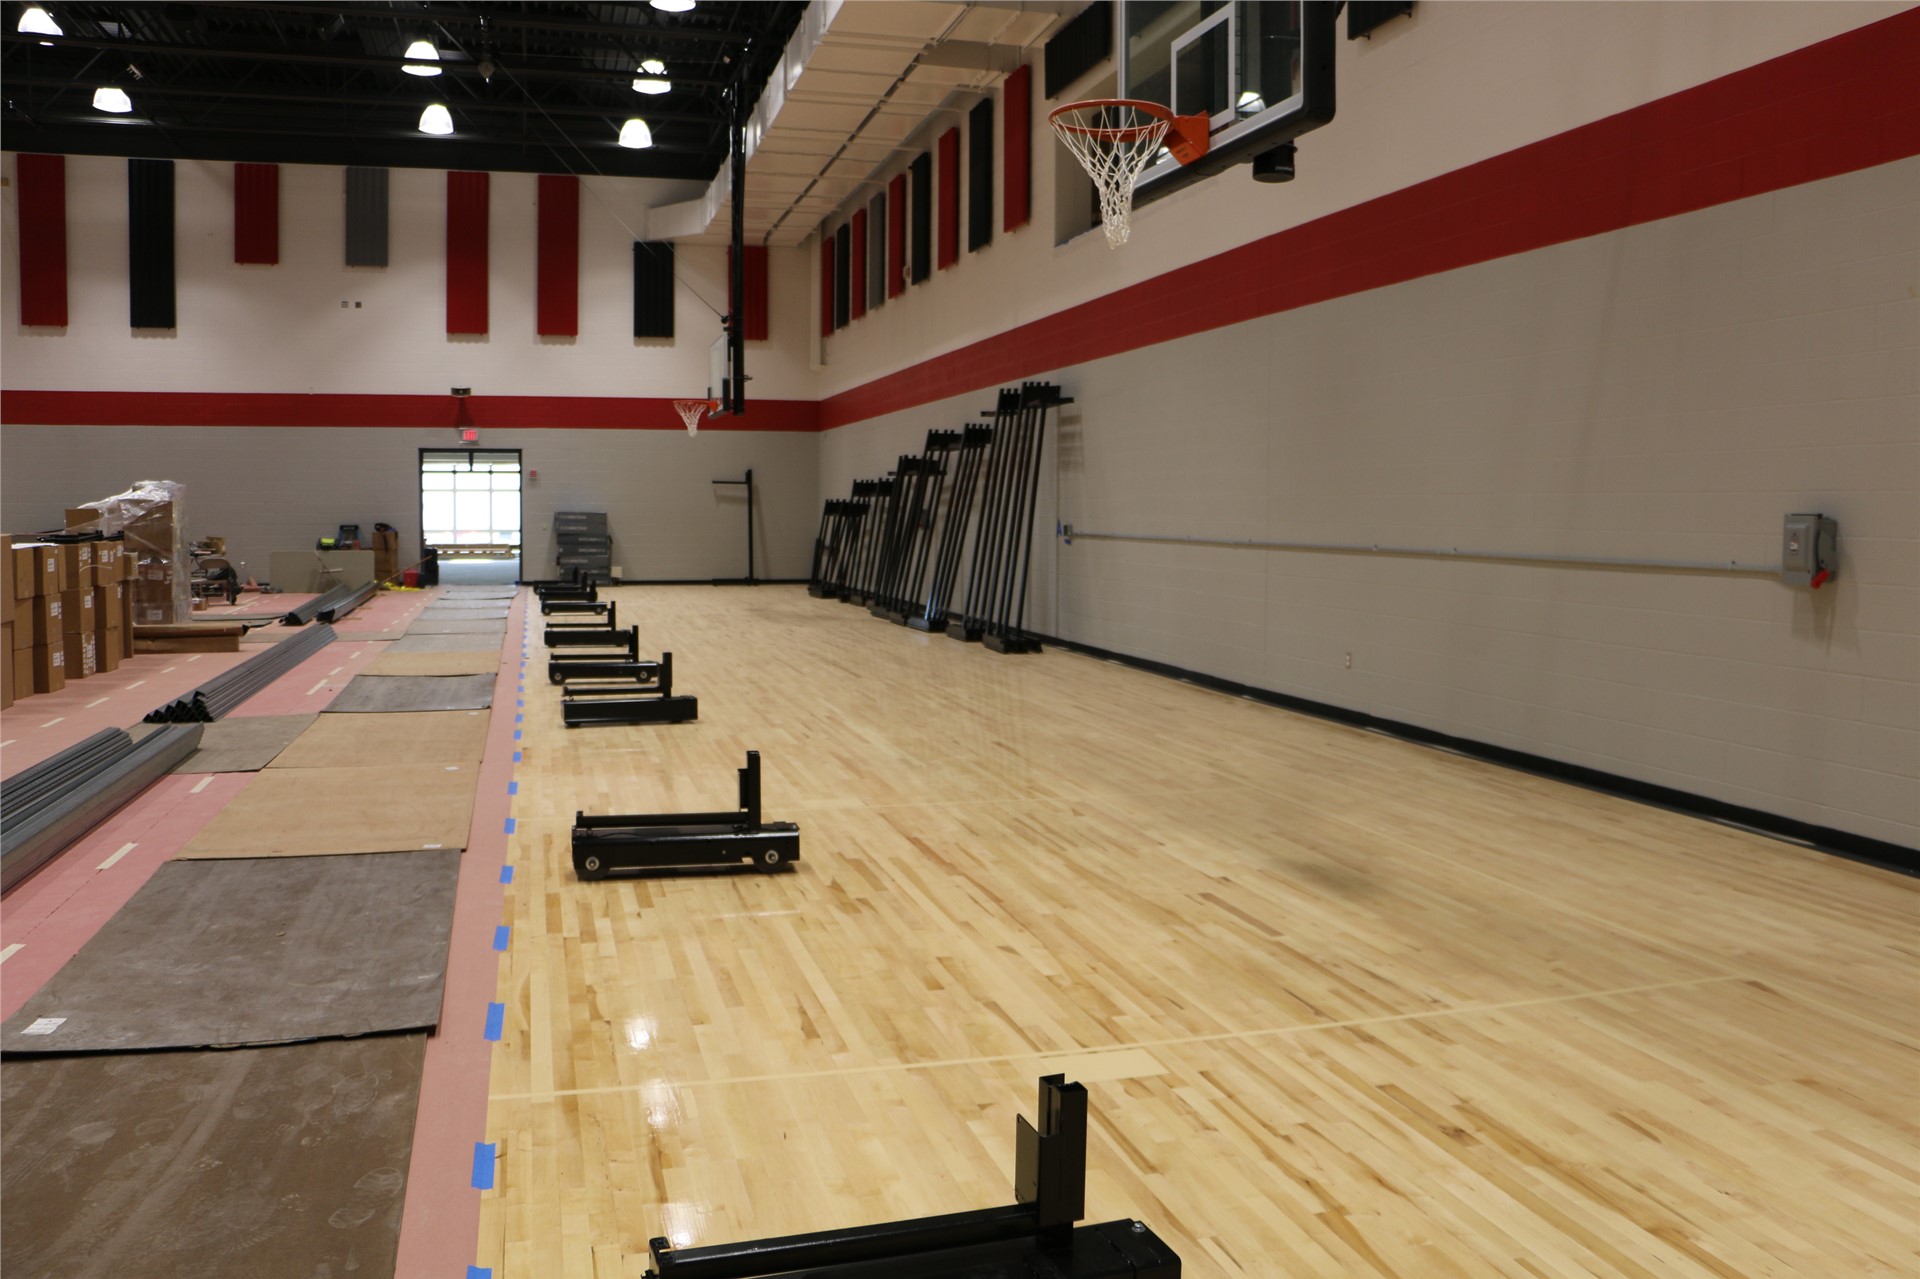 Bleachers are being installed in the gymnasium